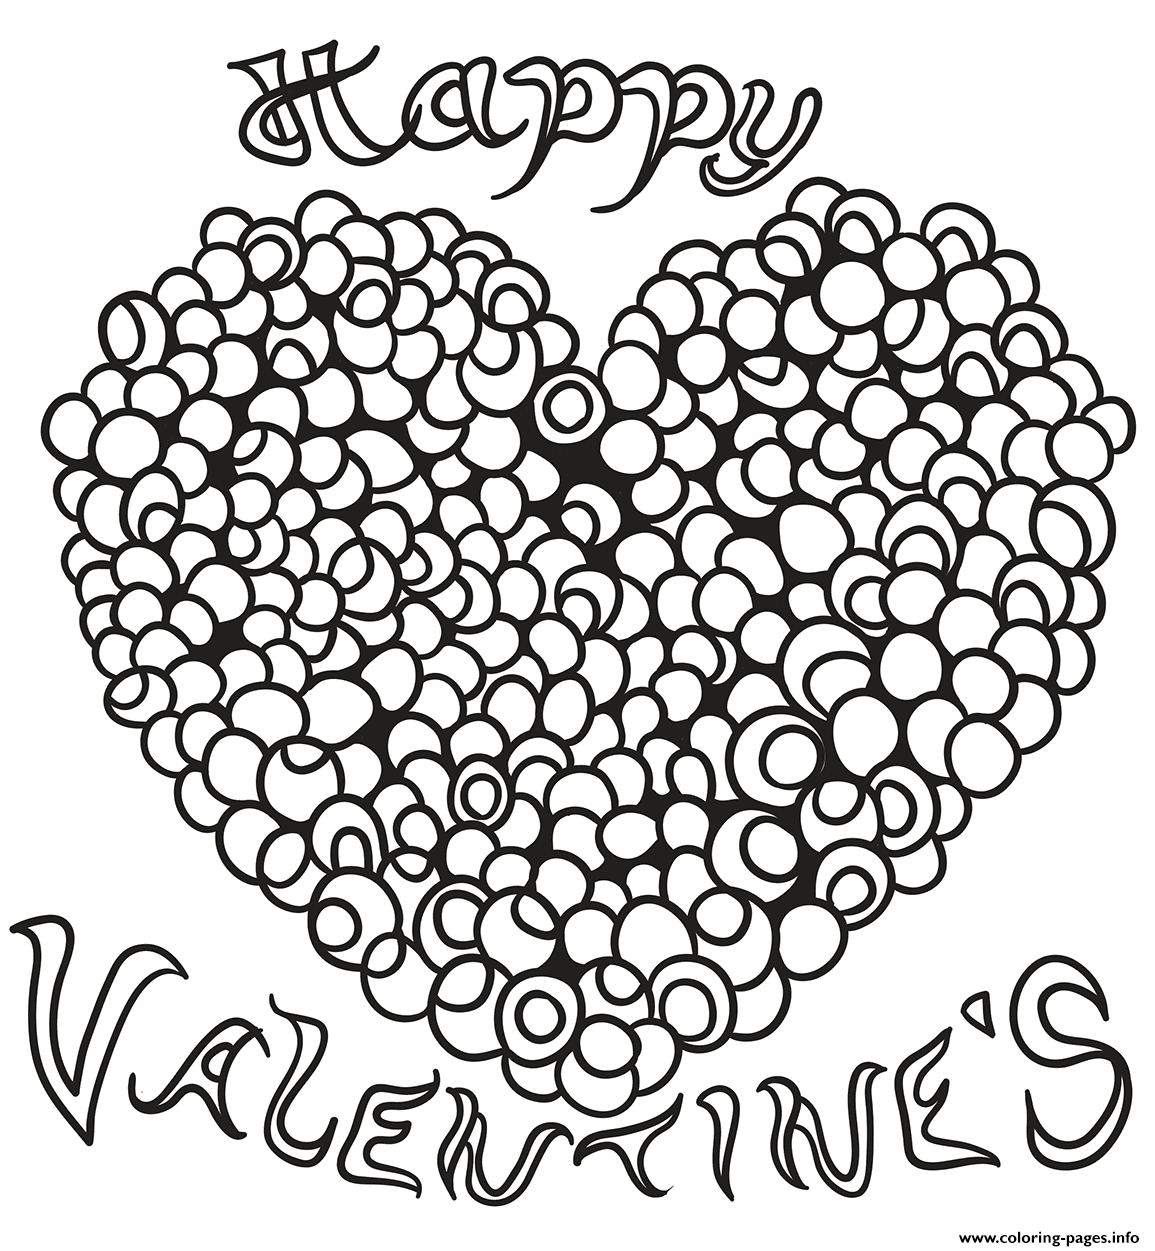 Happy Valentines Heart Adult coloring